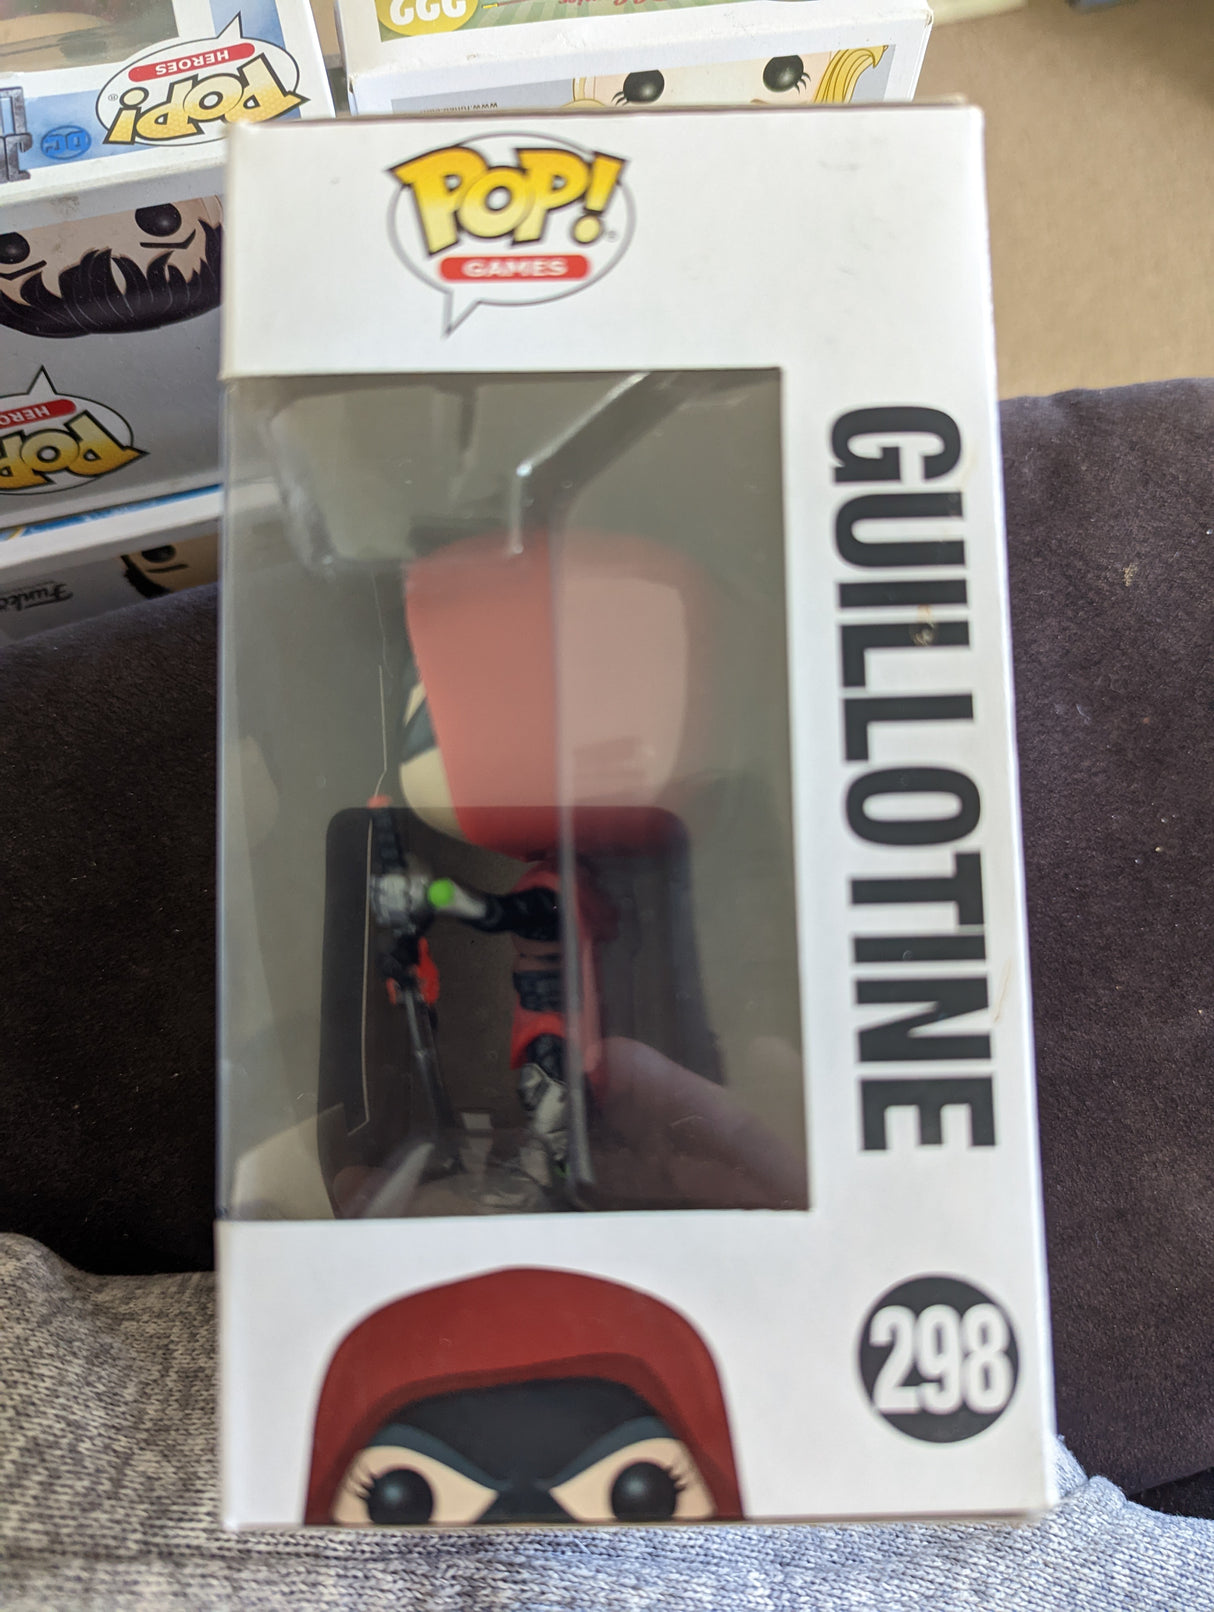 Damaged Box - Funko Pop Games - Marvel Contest of Champions - Guillotine #298 (7010299379812)